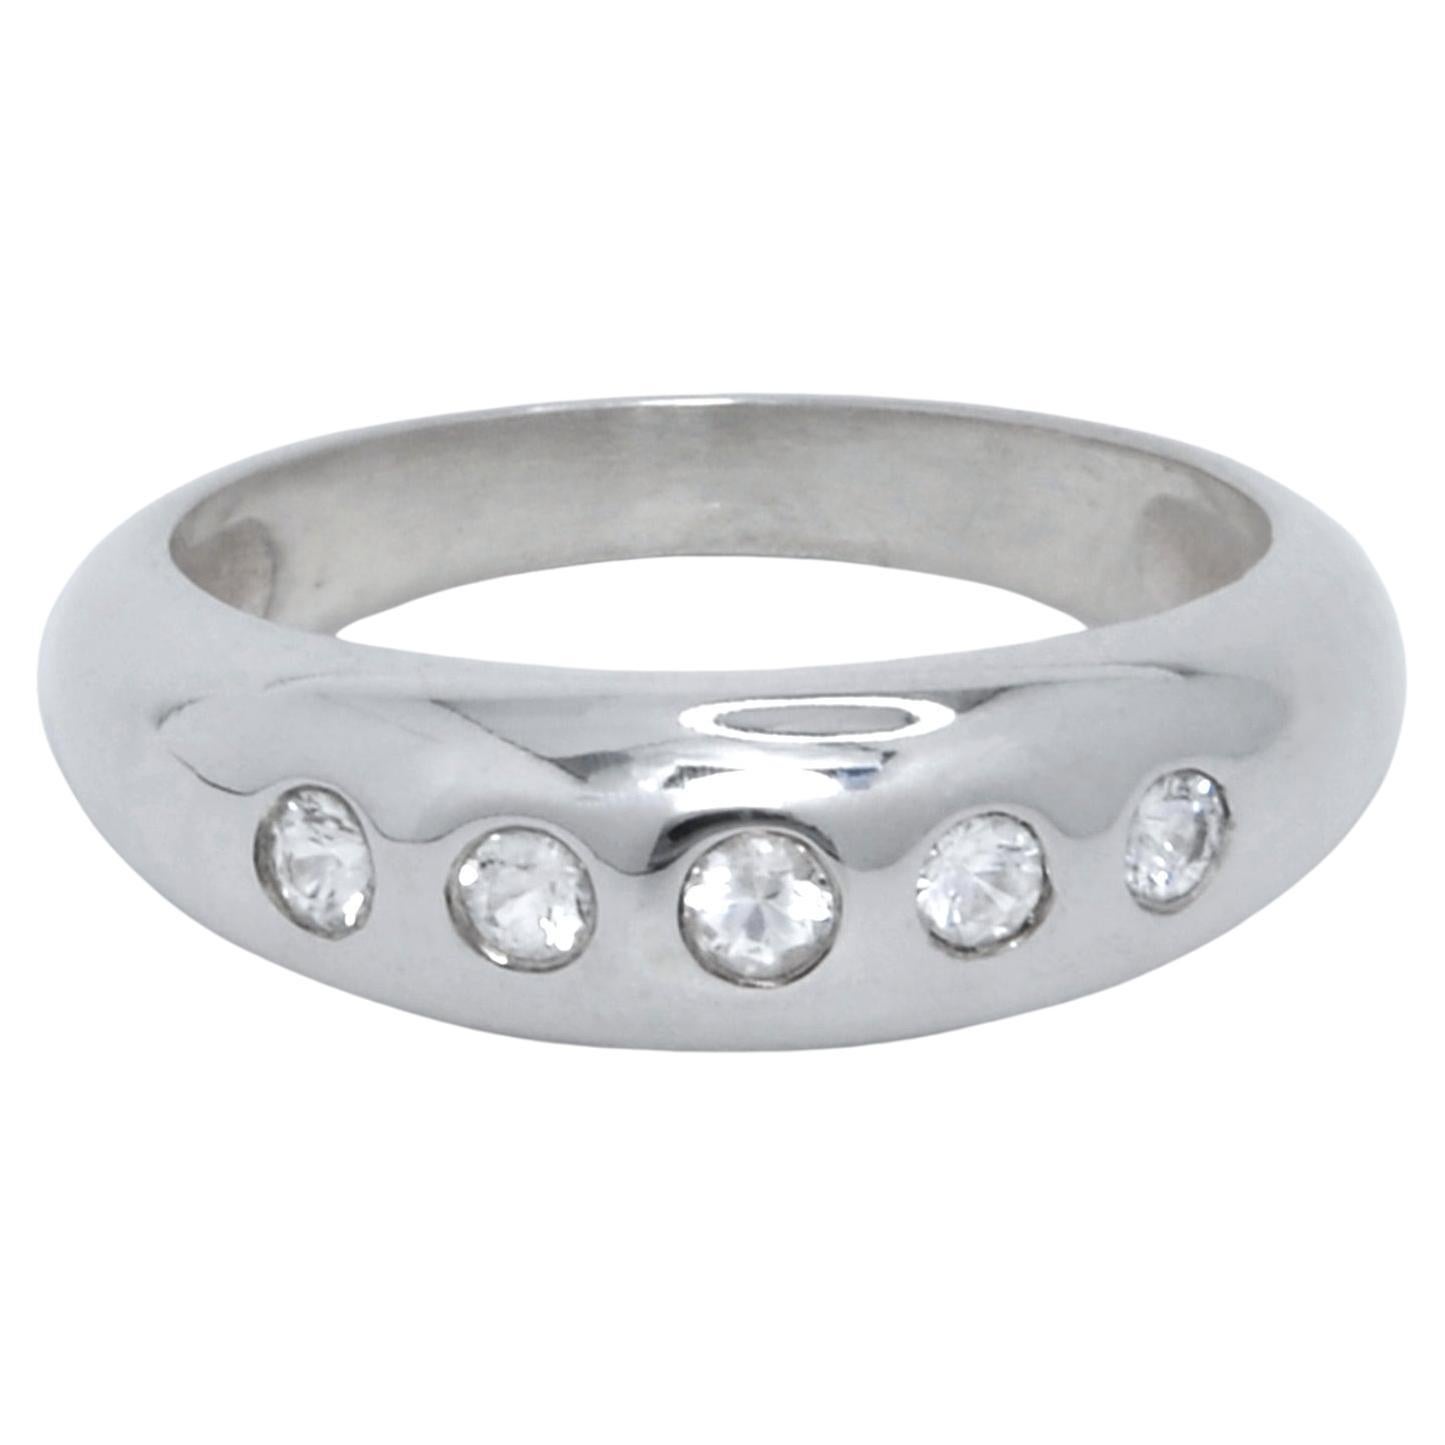 For Sale:  Ruth Nyc Fem Ring, Dome Style 5 Stone Diamond Ring in 14k White Gold